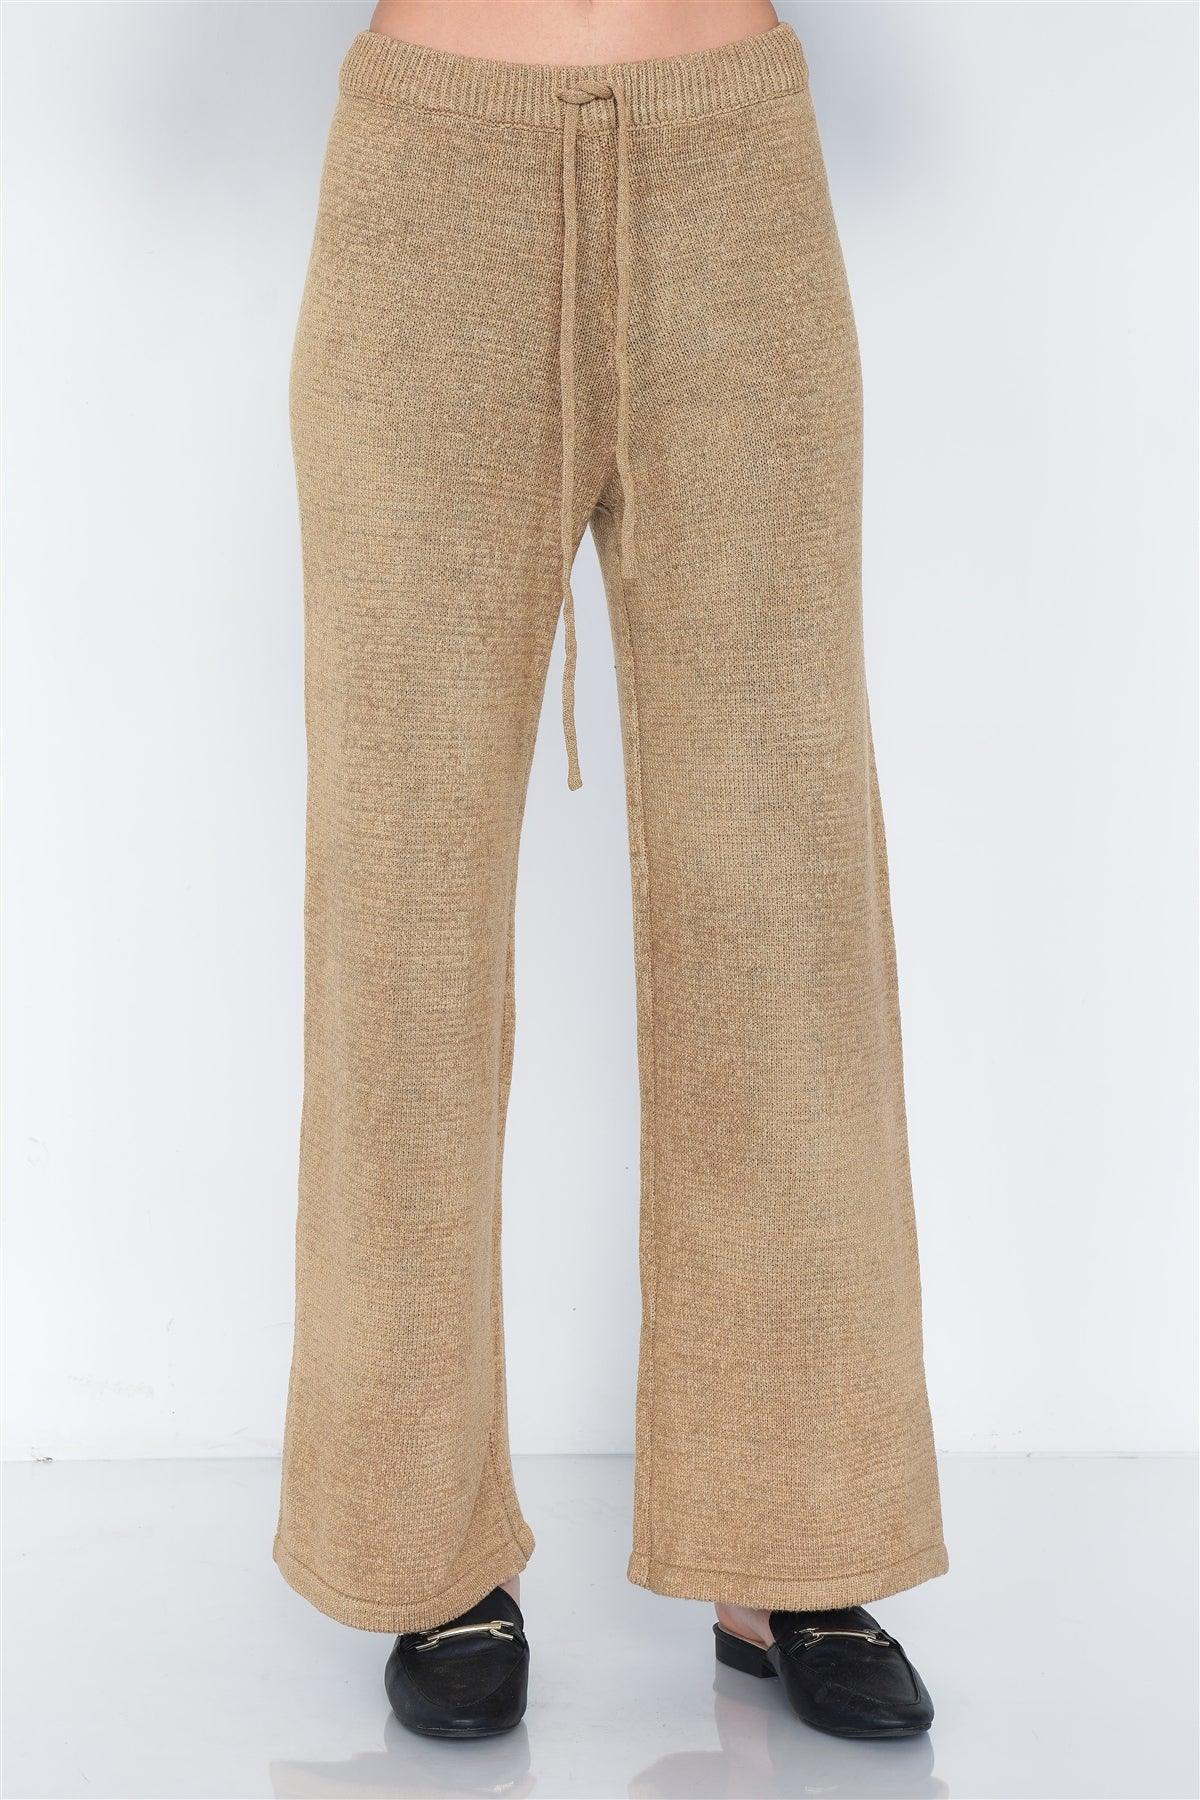 Beige Knit V-Neck Relaxed Fit Sweater & Flare Leg Pant Set   /3-2-1